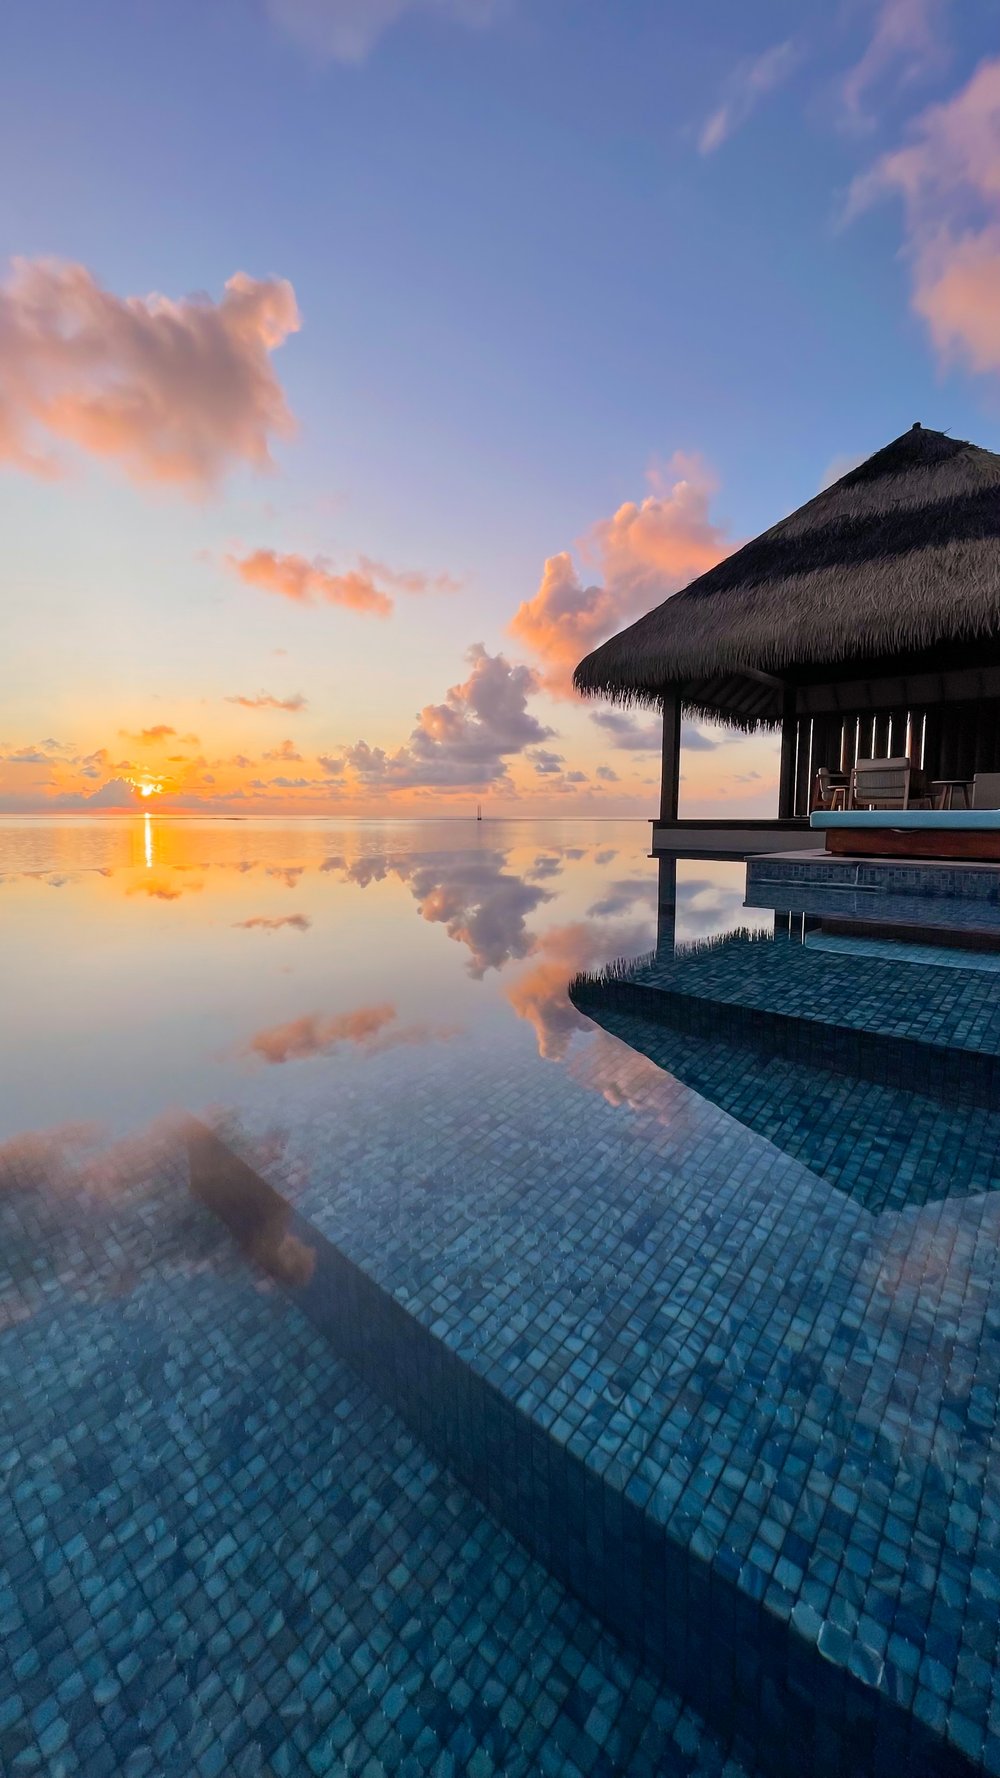 Sunset Views from the Overwater Villa